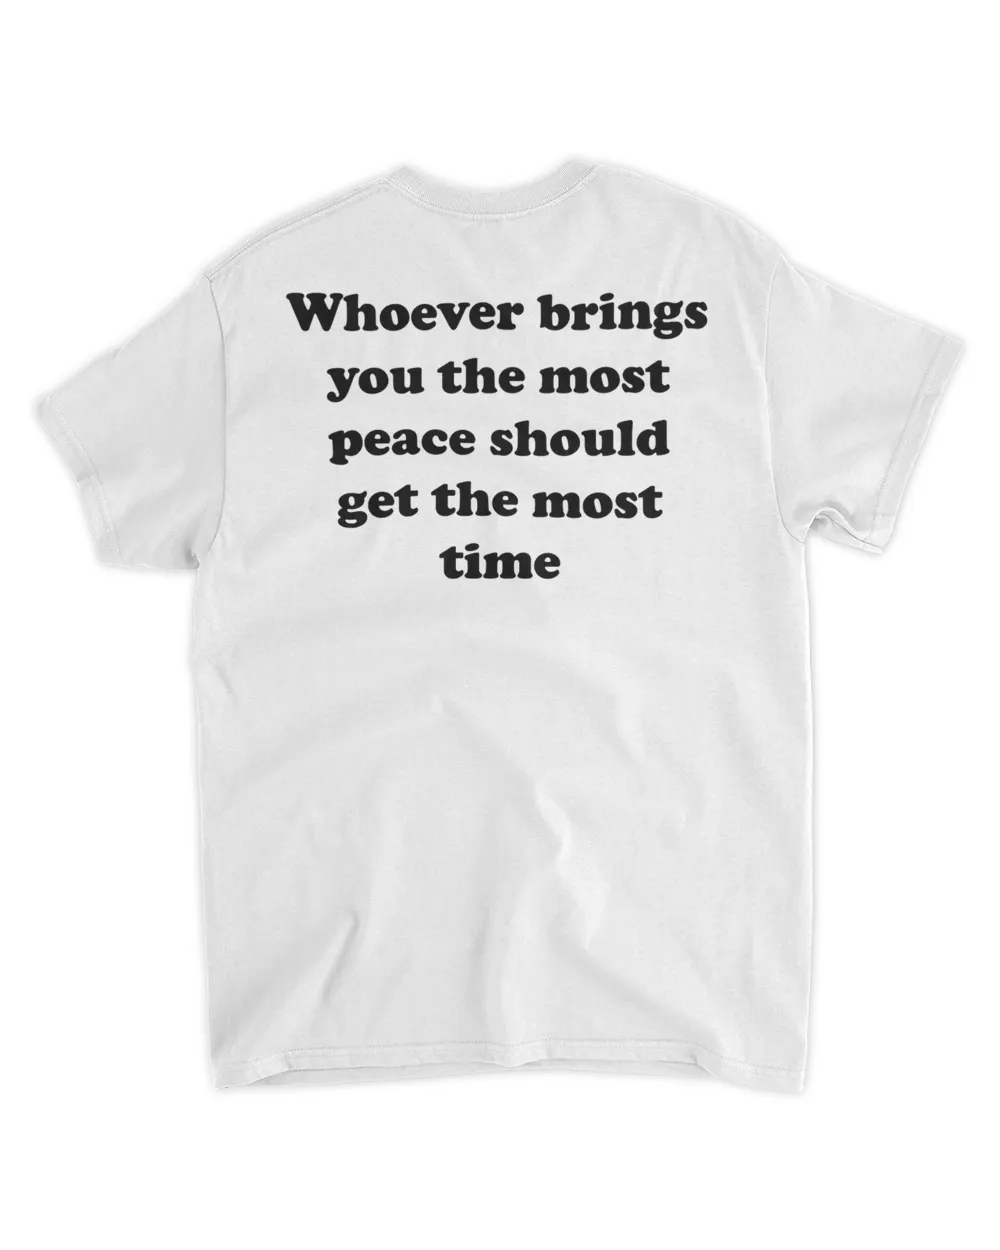  Whoever brings you the most peace should get the most time shirt